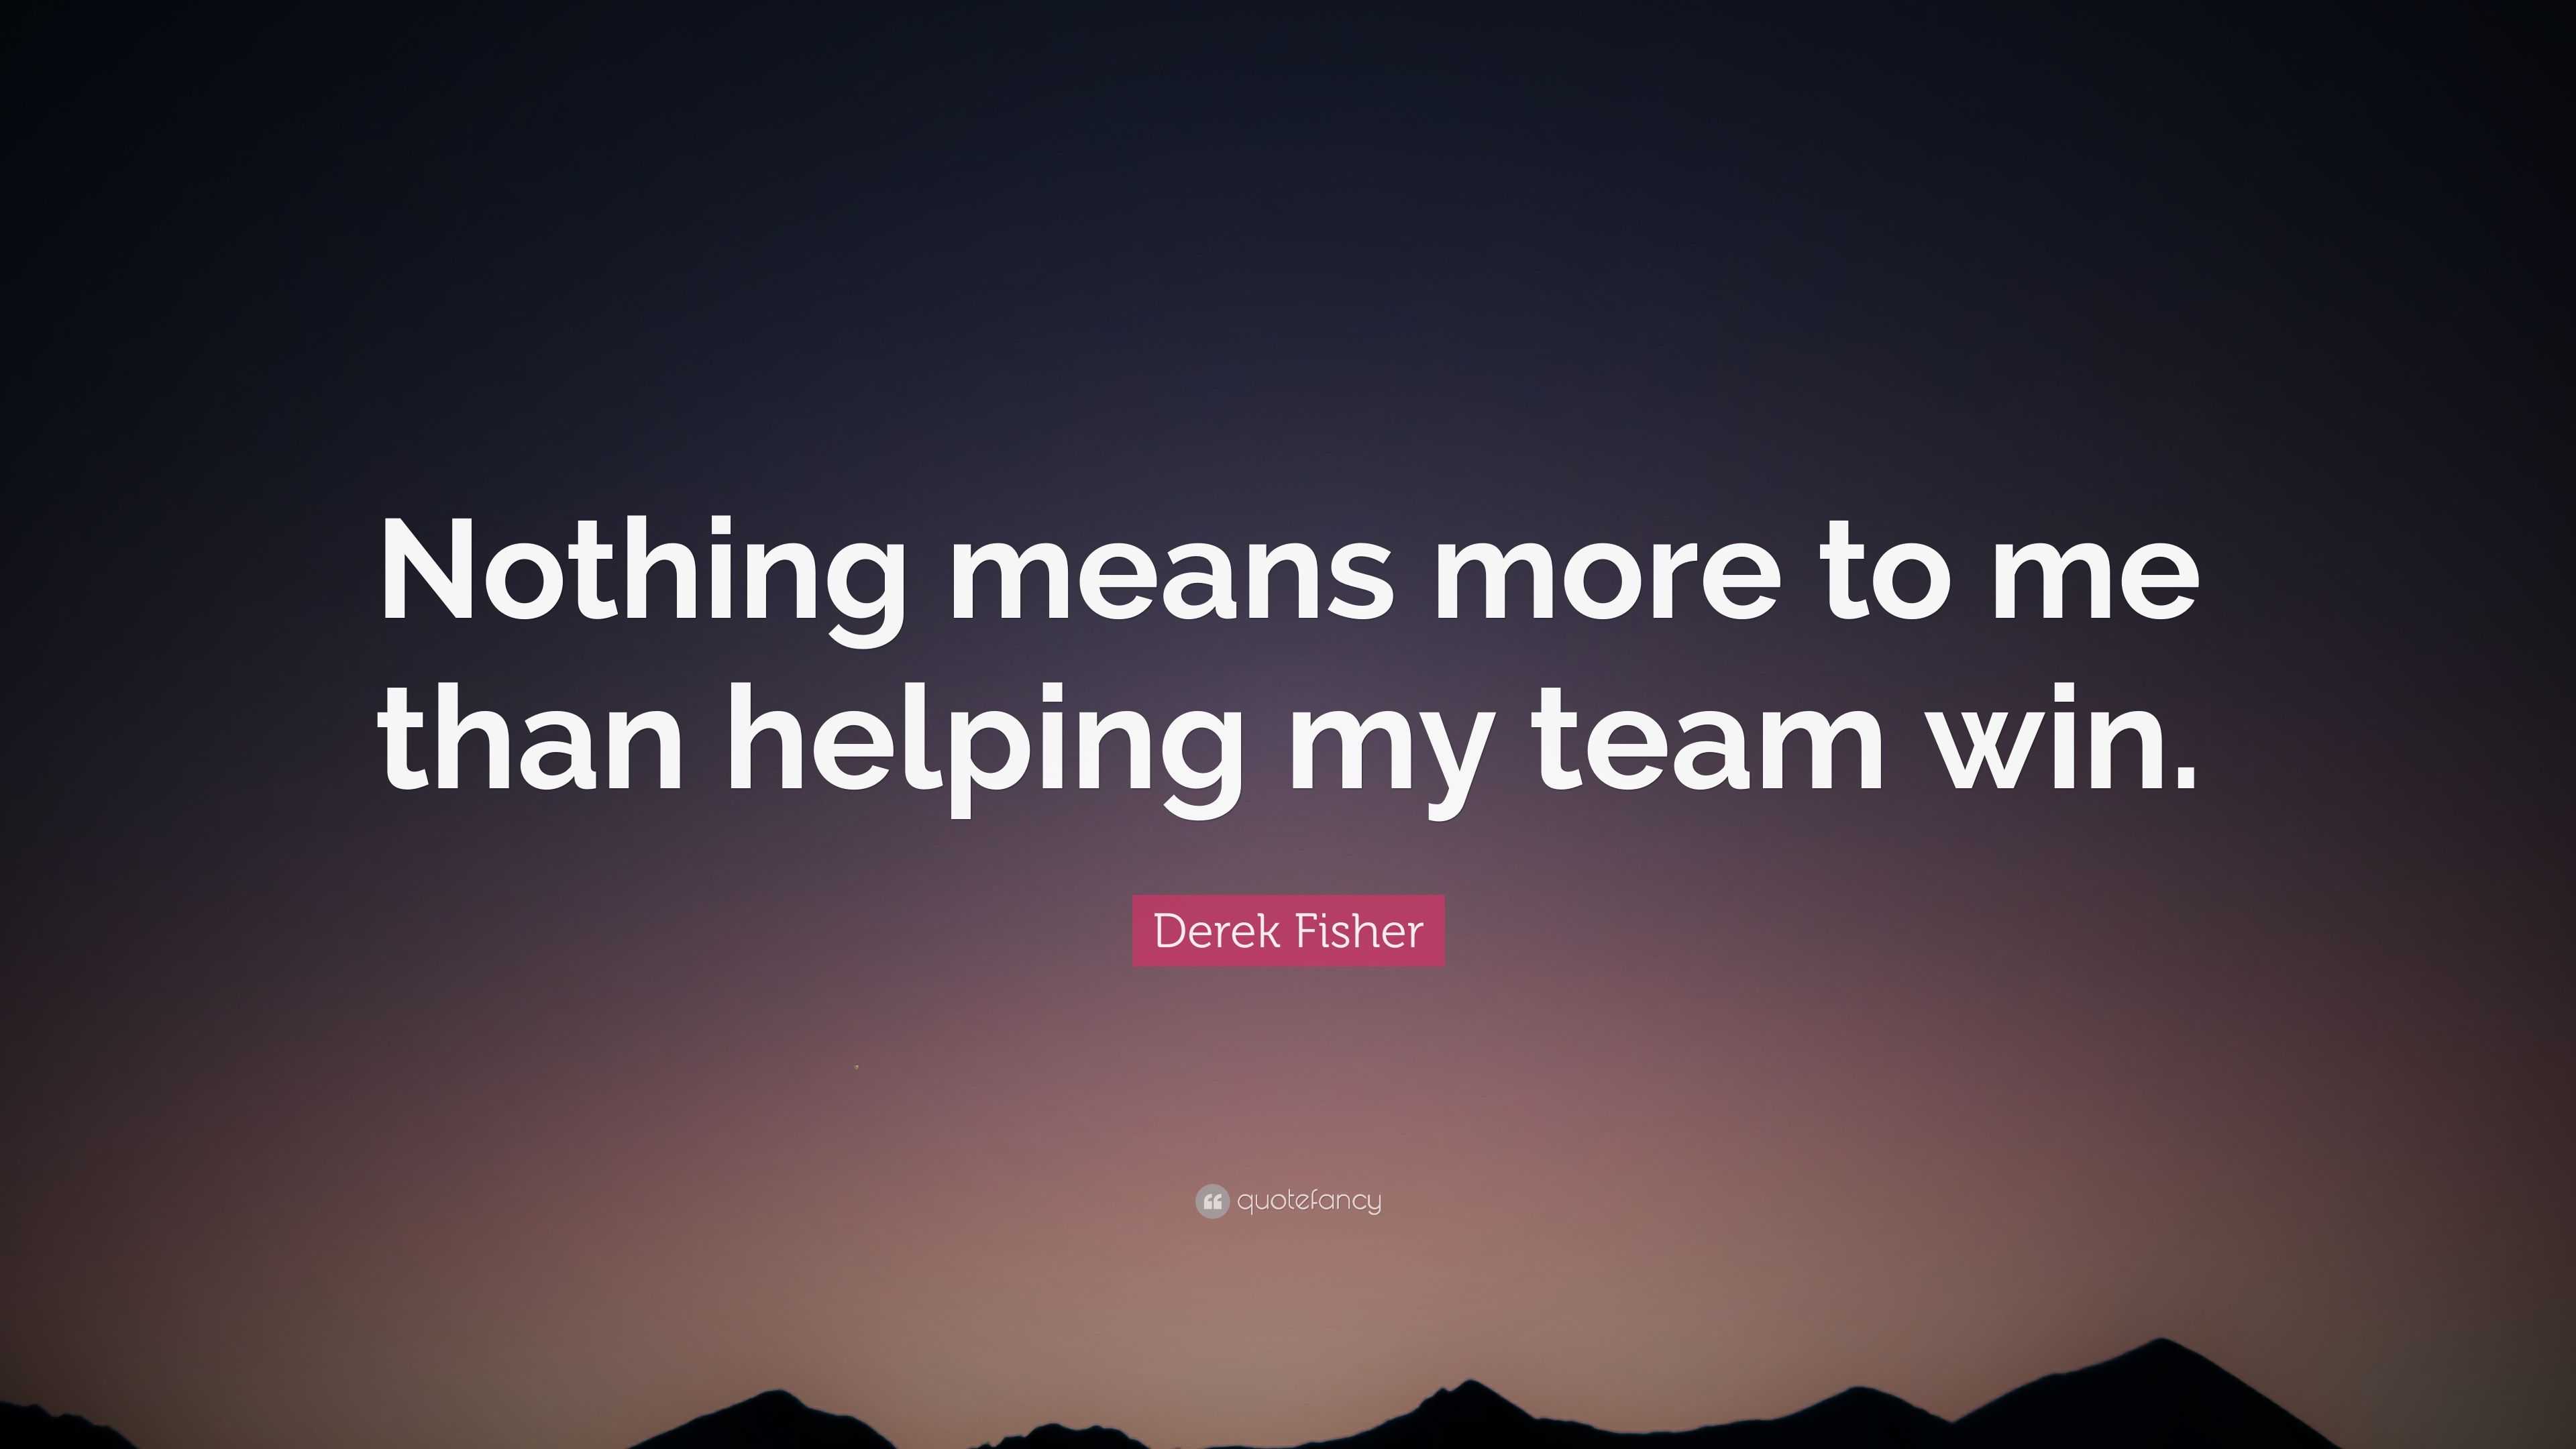 Derek Fisher Quote: “Nothing means more to me than helping my team win.”